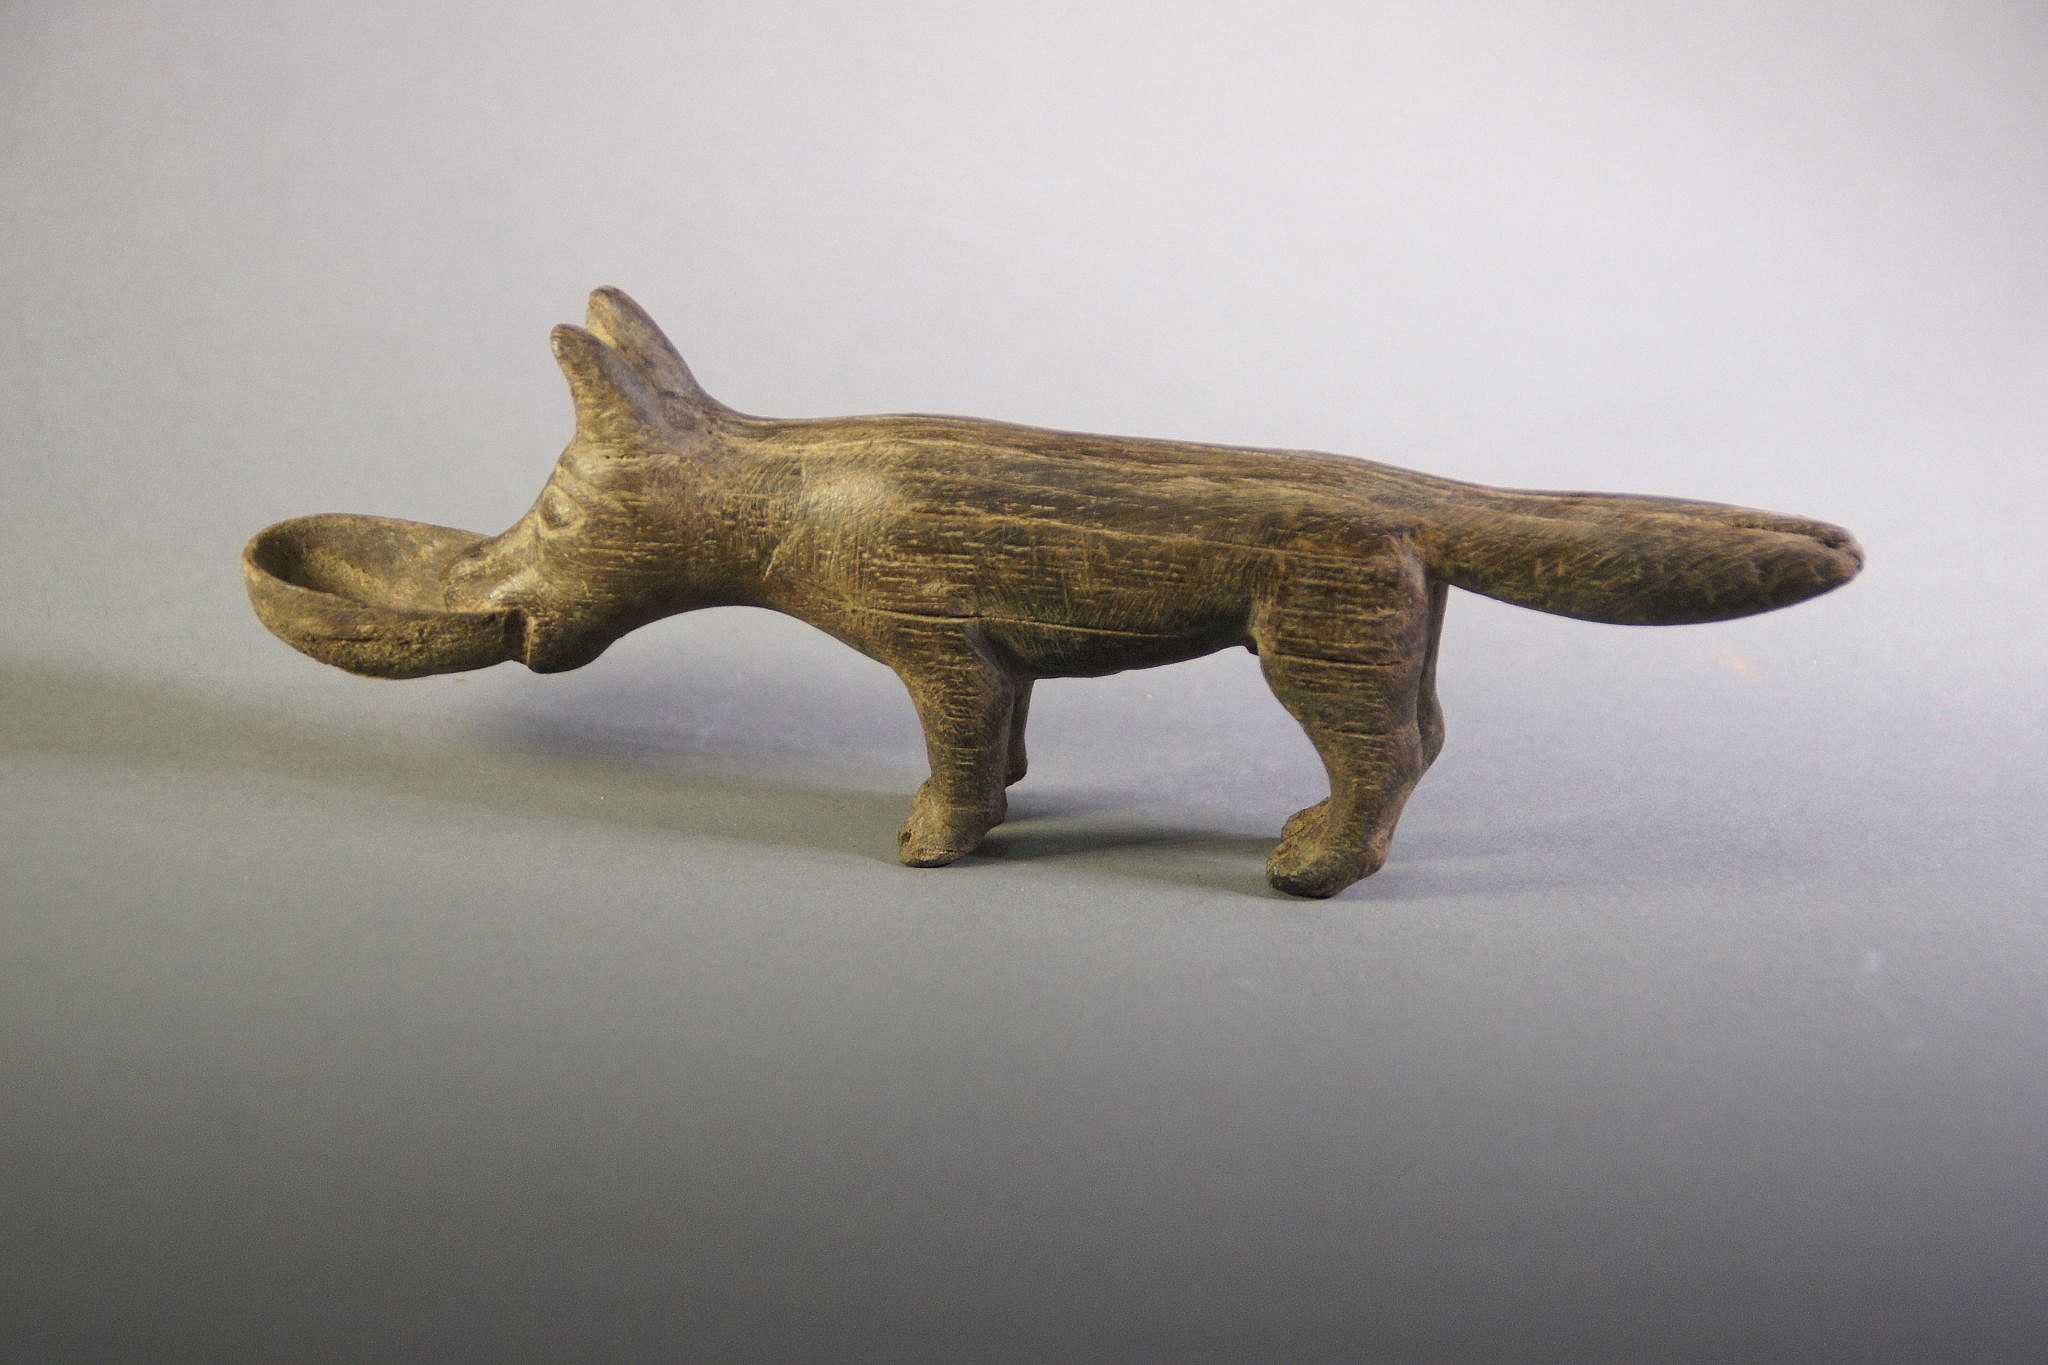 Peru, Wari Carved Wooden Dog with Bowl in Mouth
The dog has a fluffy tail and is holding a bowl in its mouth, asking for food.
Media: Wood
Dimensions: Length: 7"
Price Upon Request
N3033